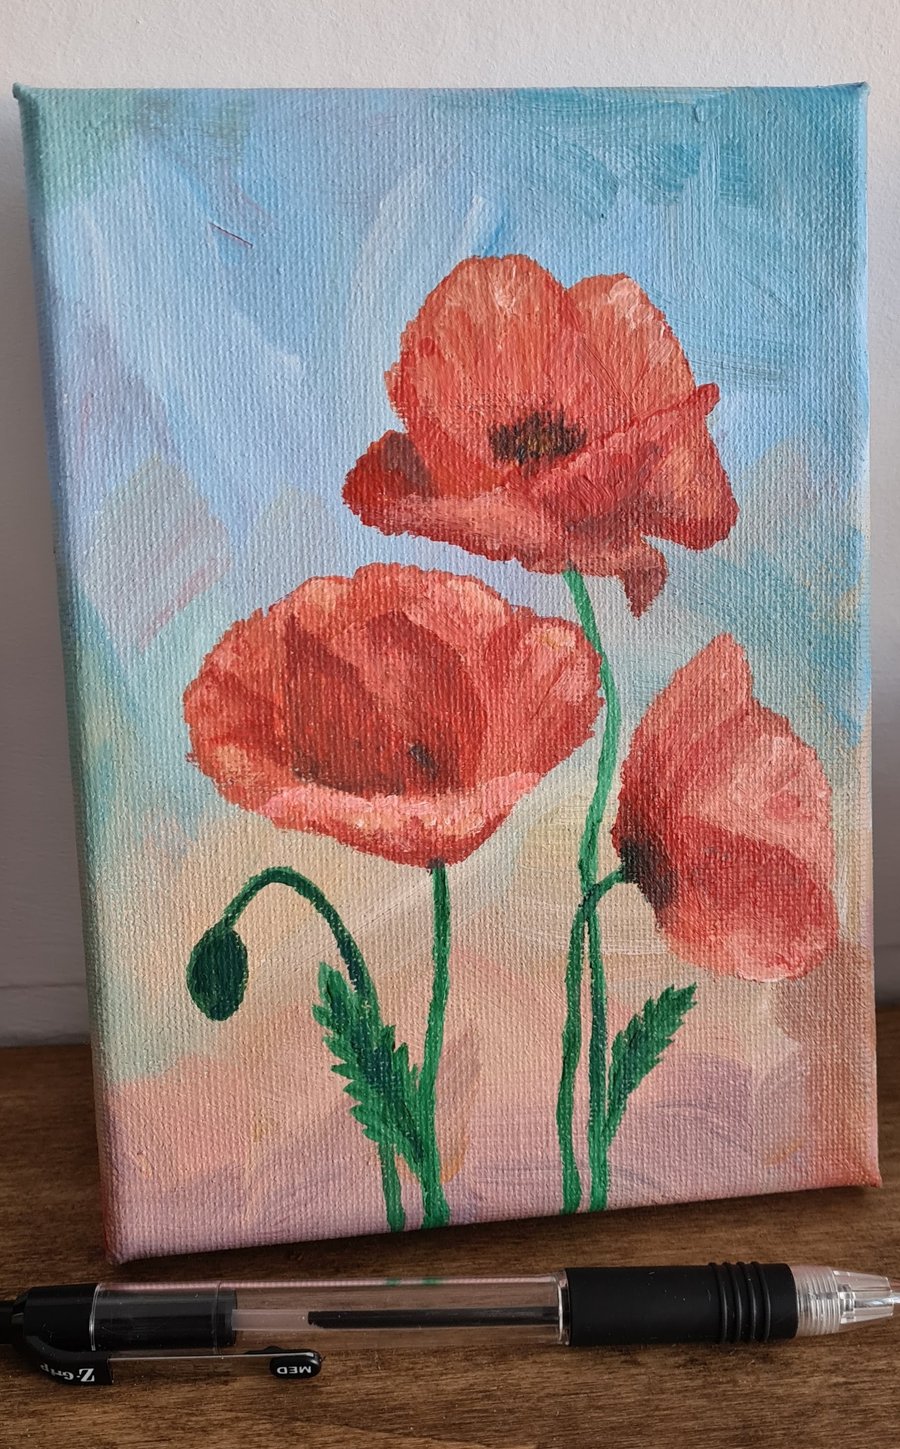 Poppy acrylic painting on canvas of some poppies